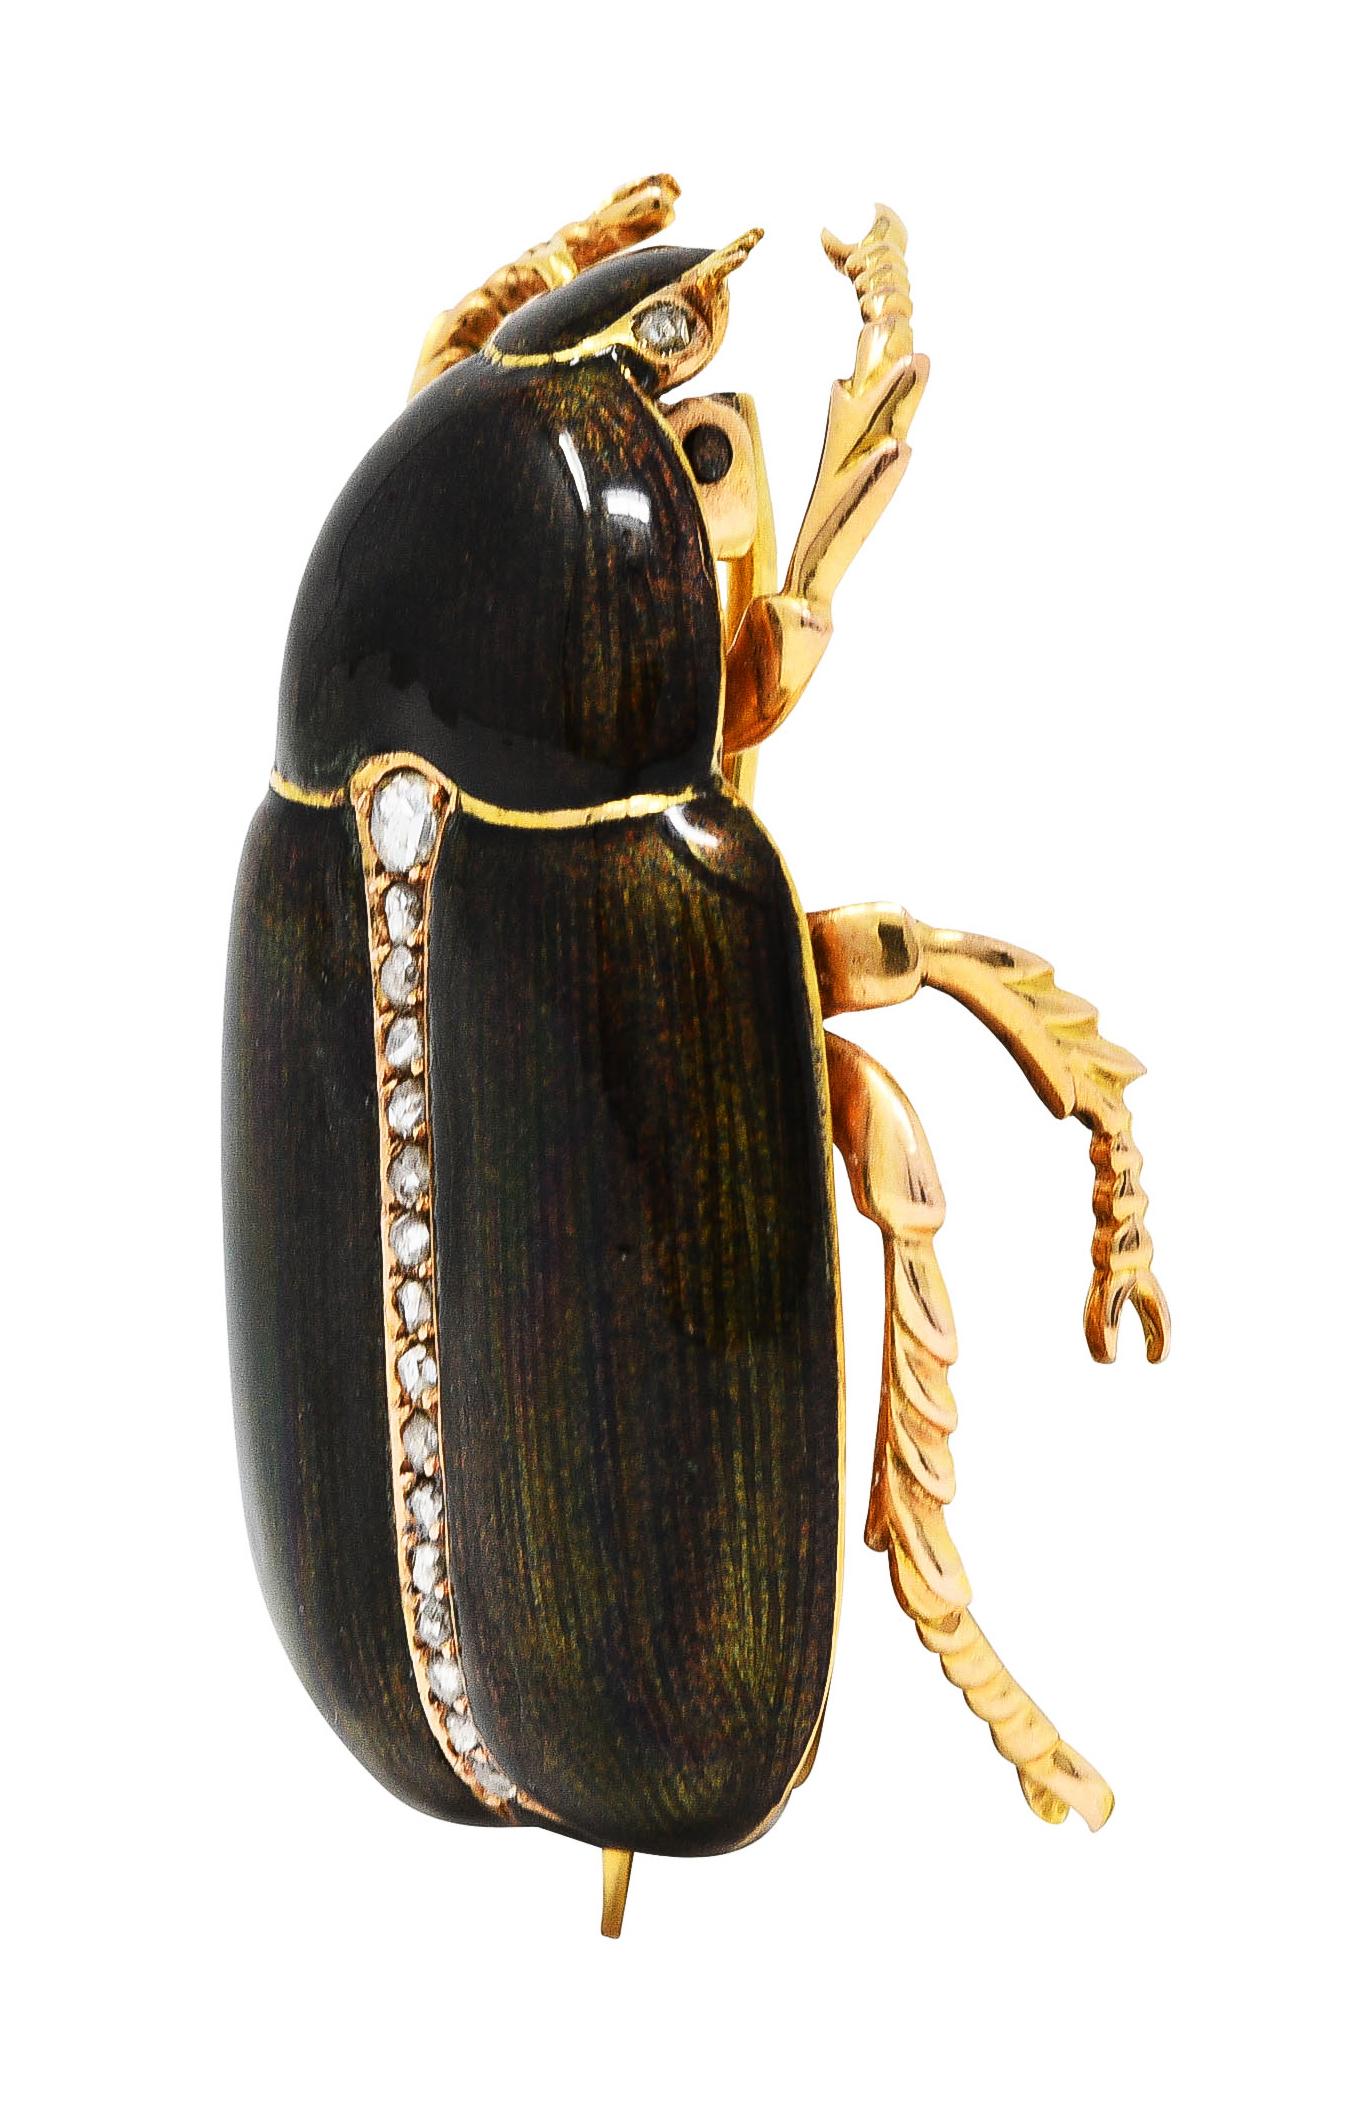 Brooch is designed as a highly rendered gold scarab beetle with grooved limbs. Featuring a guillochè enamel body - translucent glossy greenish to greenish brown. With an engraved linear pattern throughout - exhibiting minimal loss. Accented by rose